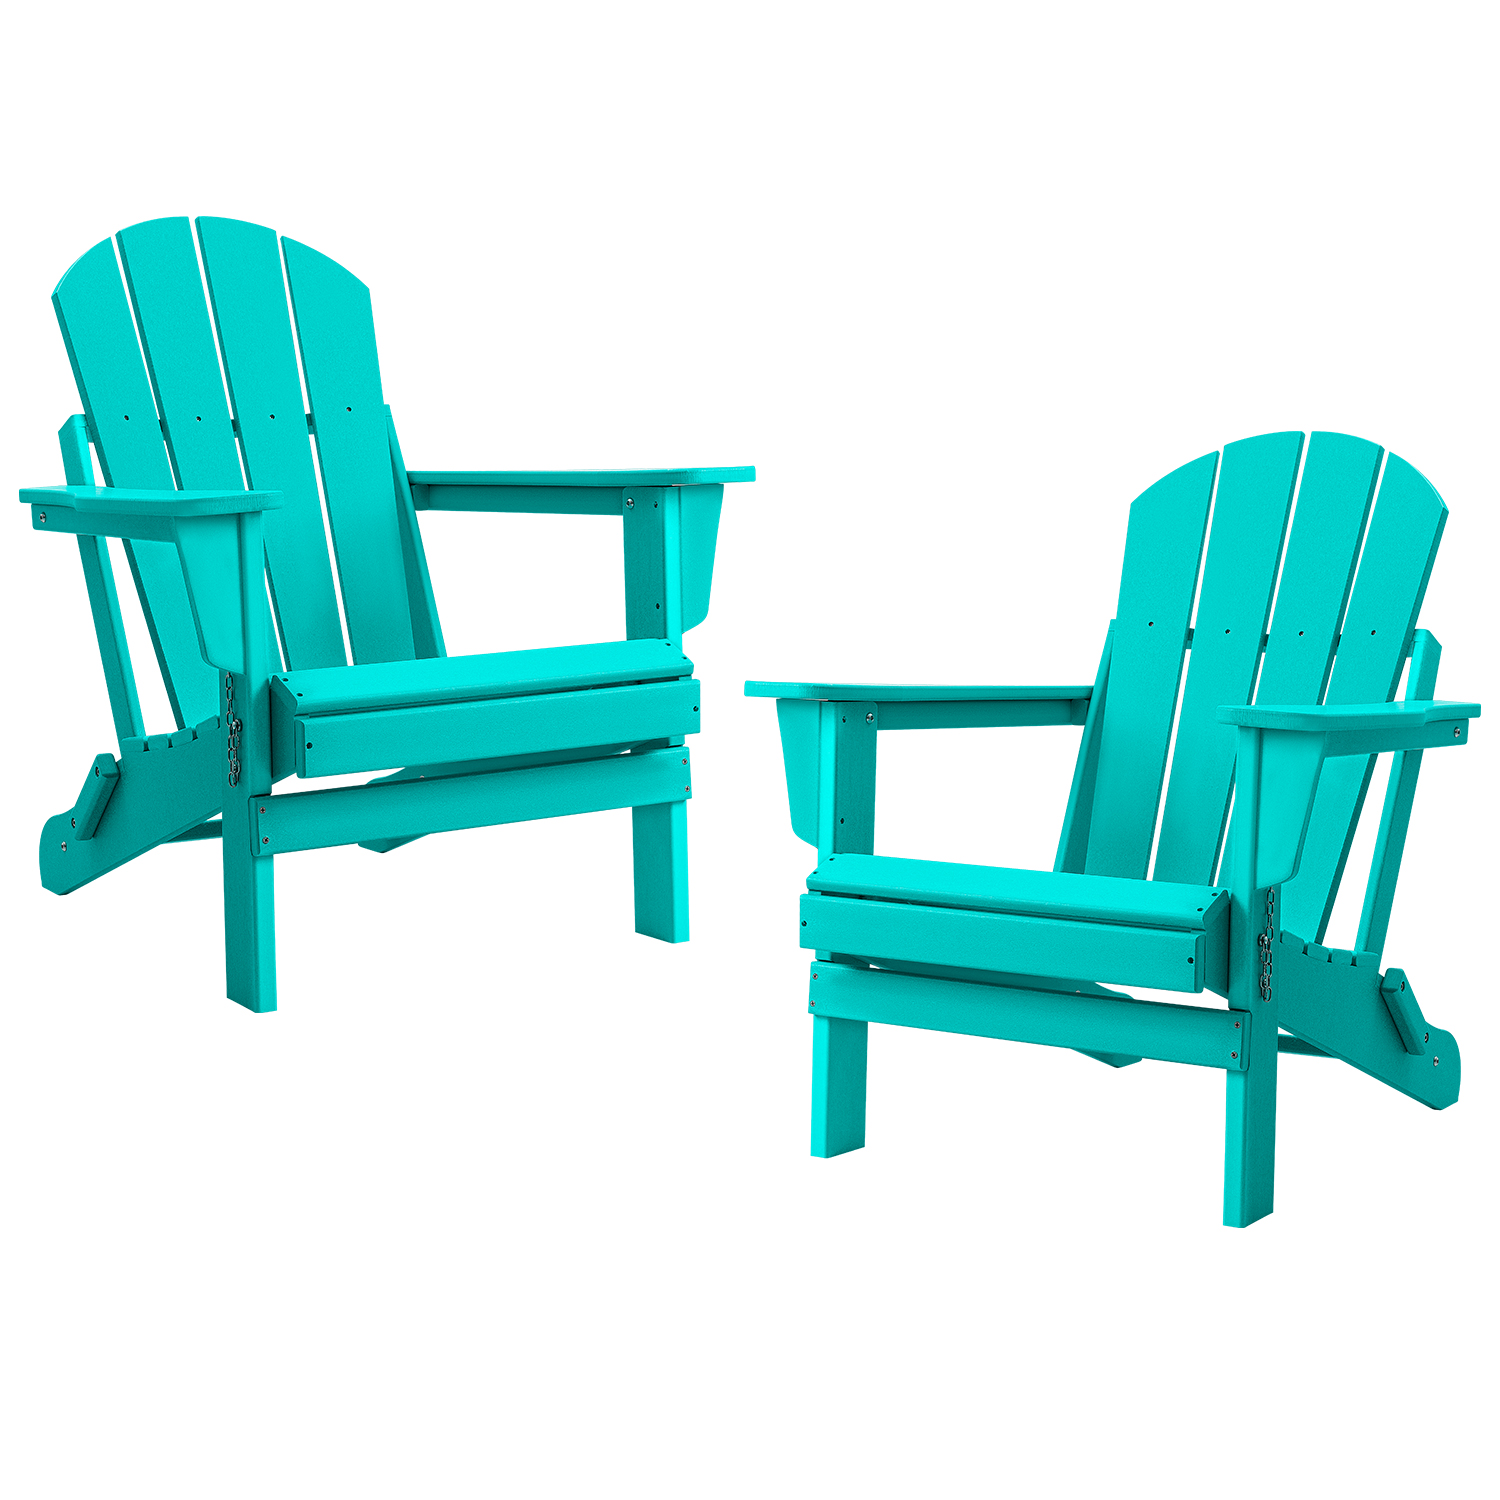 Devoko Folding Adirondack Chair Set of 2 HDPE Weather Resistant Outdoor Lounge Chair, Turquoise - image 2 of 6